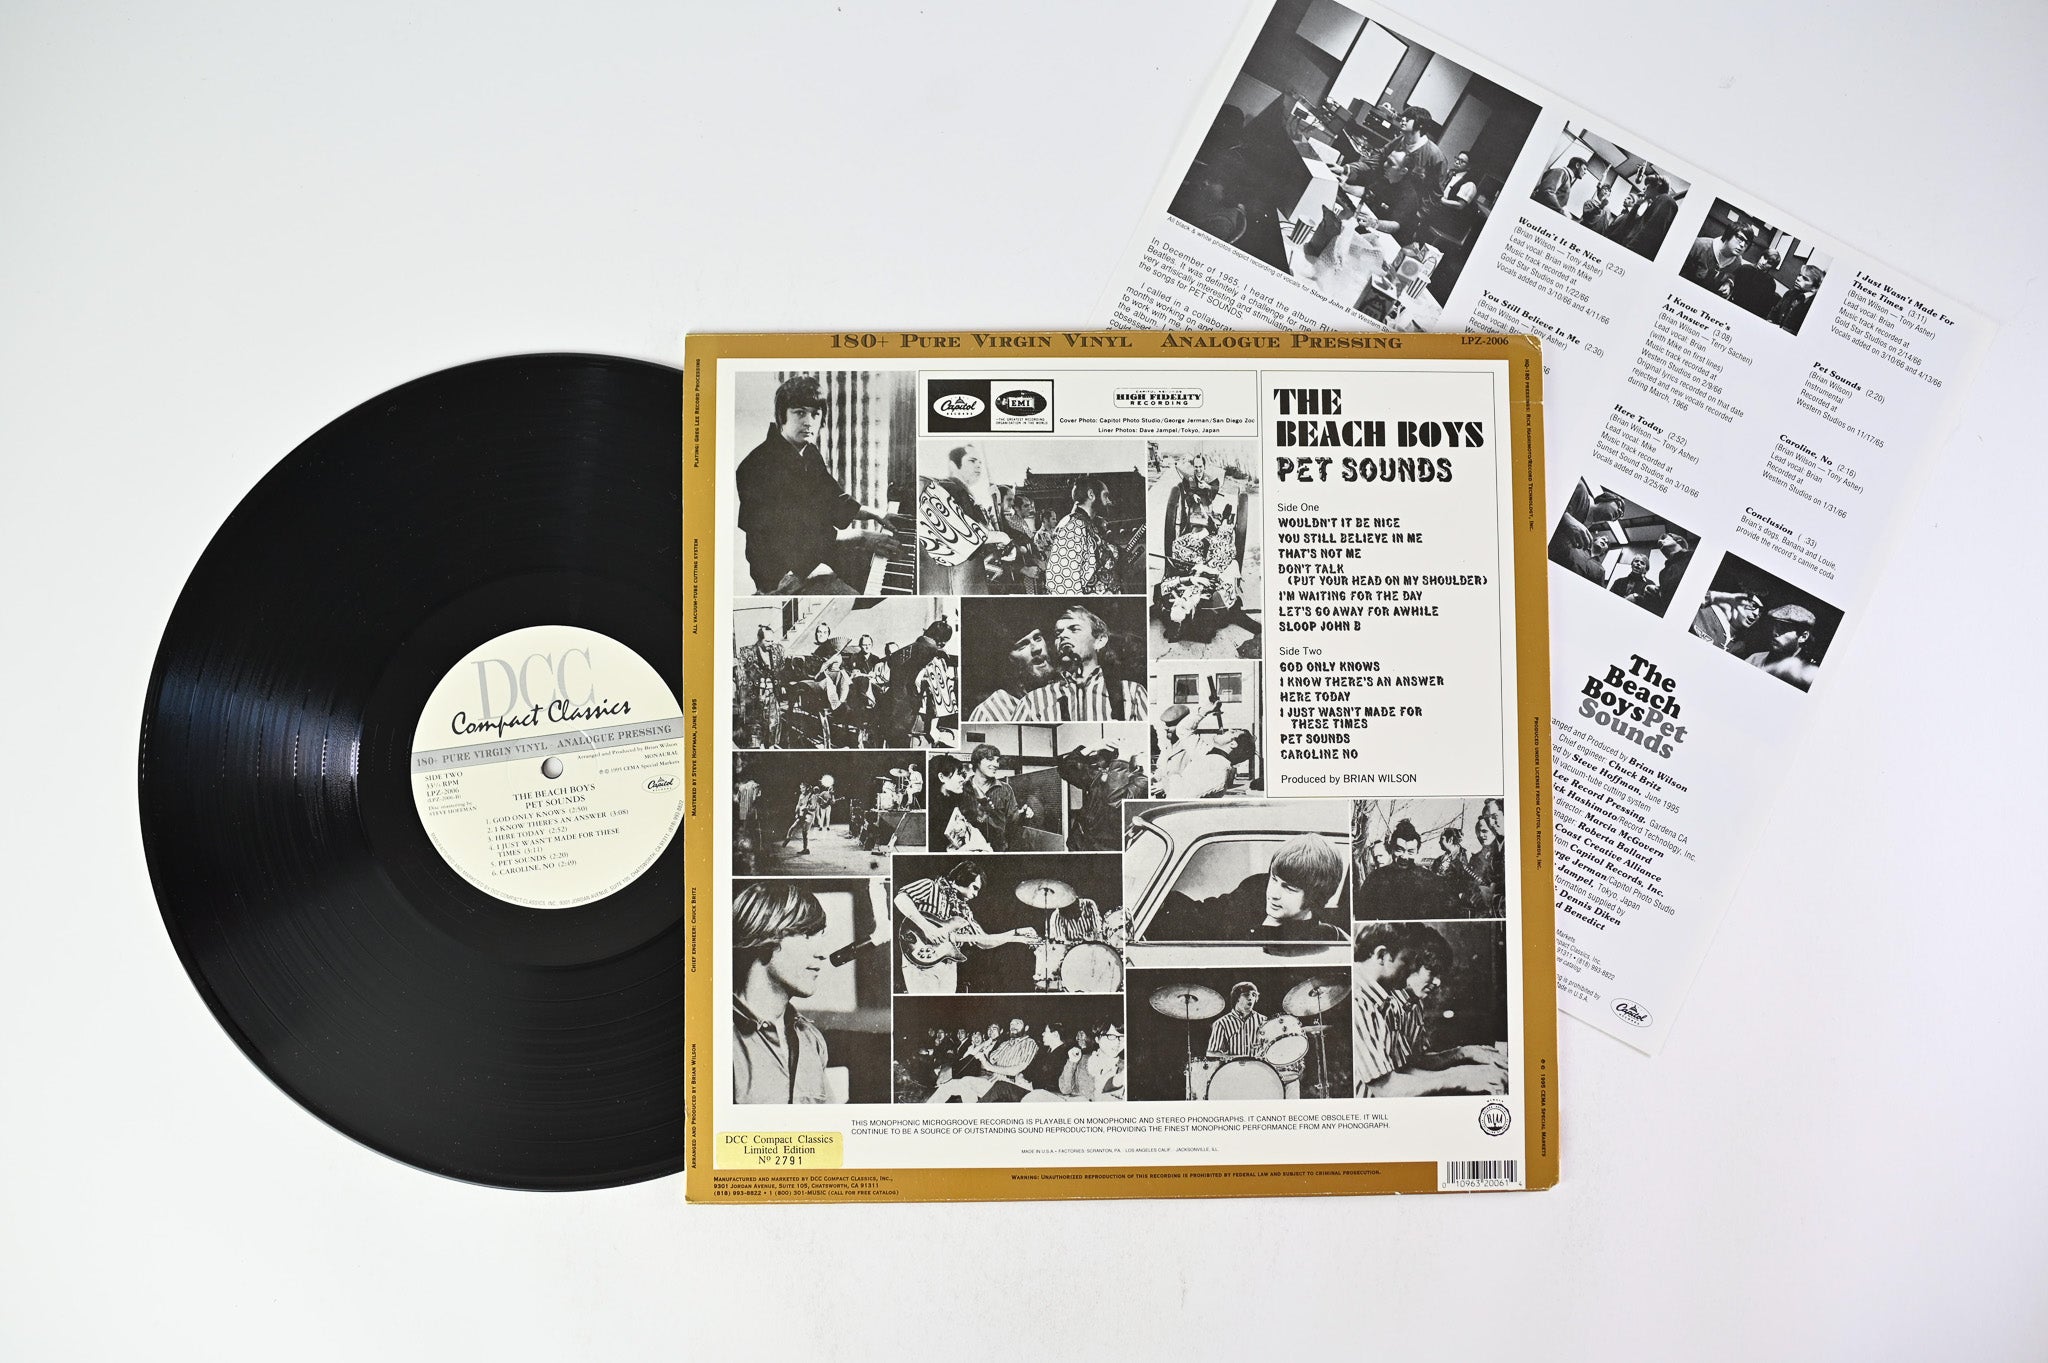 The Beach Boys - Pet Sounds on DCC Compact Classics Ltd Numbered Mono Reissue